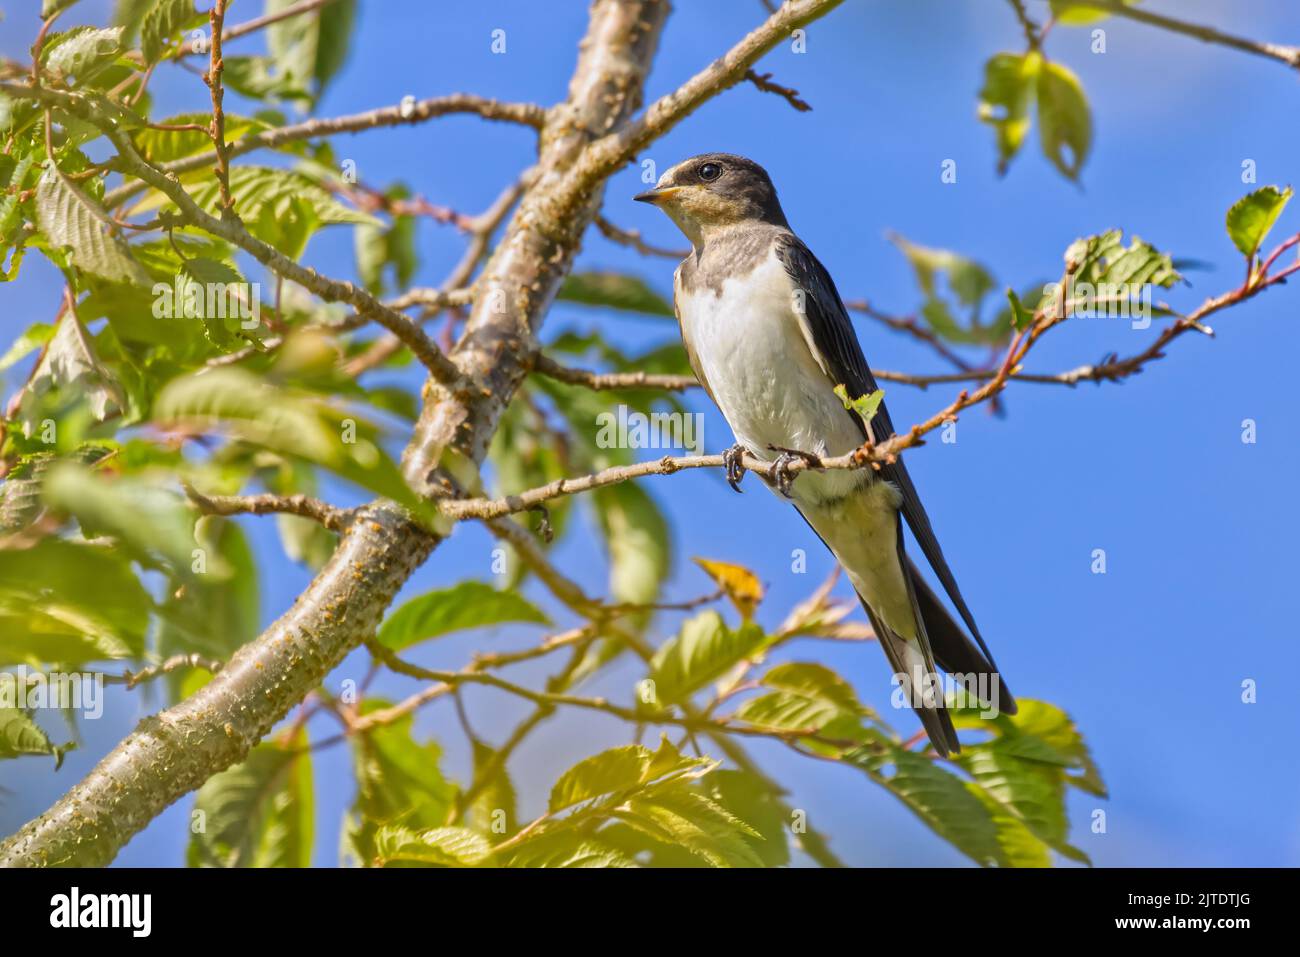 Swallow perched on a tree before flying from Europe to Africa Stock Photo